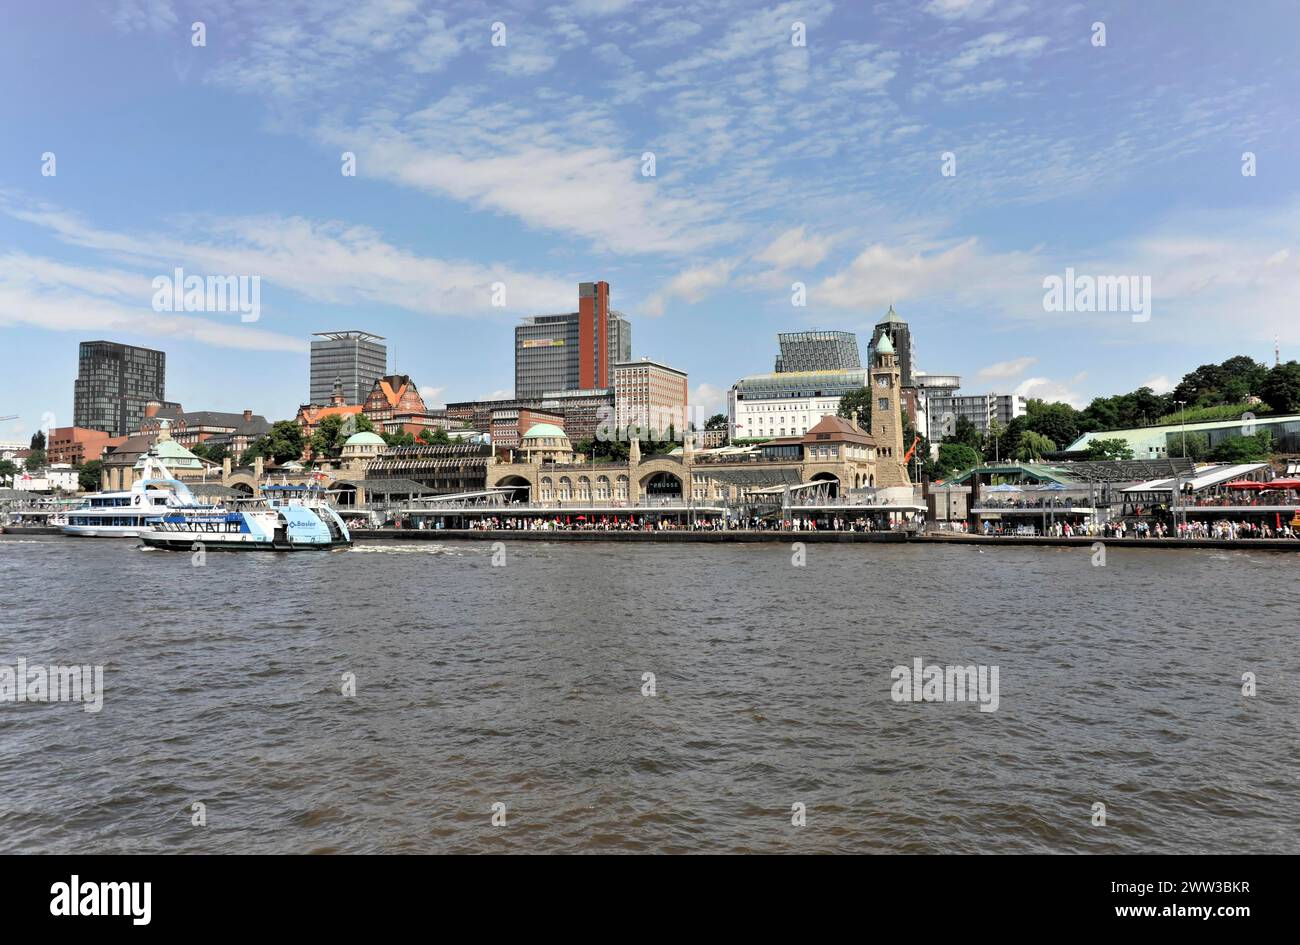 City view with modern skyline and riverbank, boats are moored on the shore, Hamburg, Hanseatic City of Hamburg, Germany Stock Photo